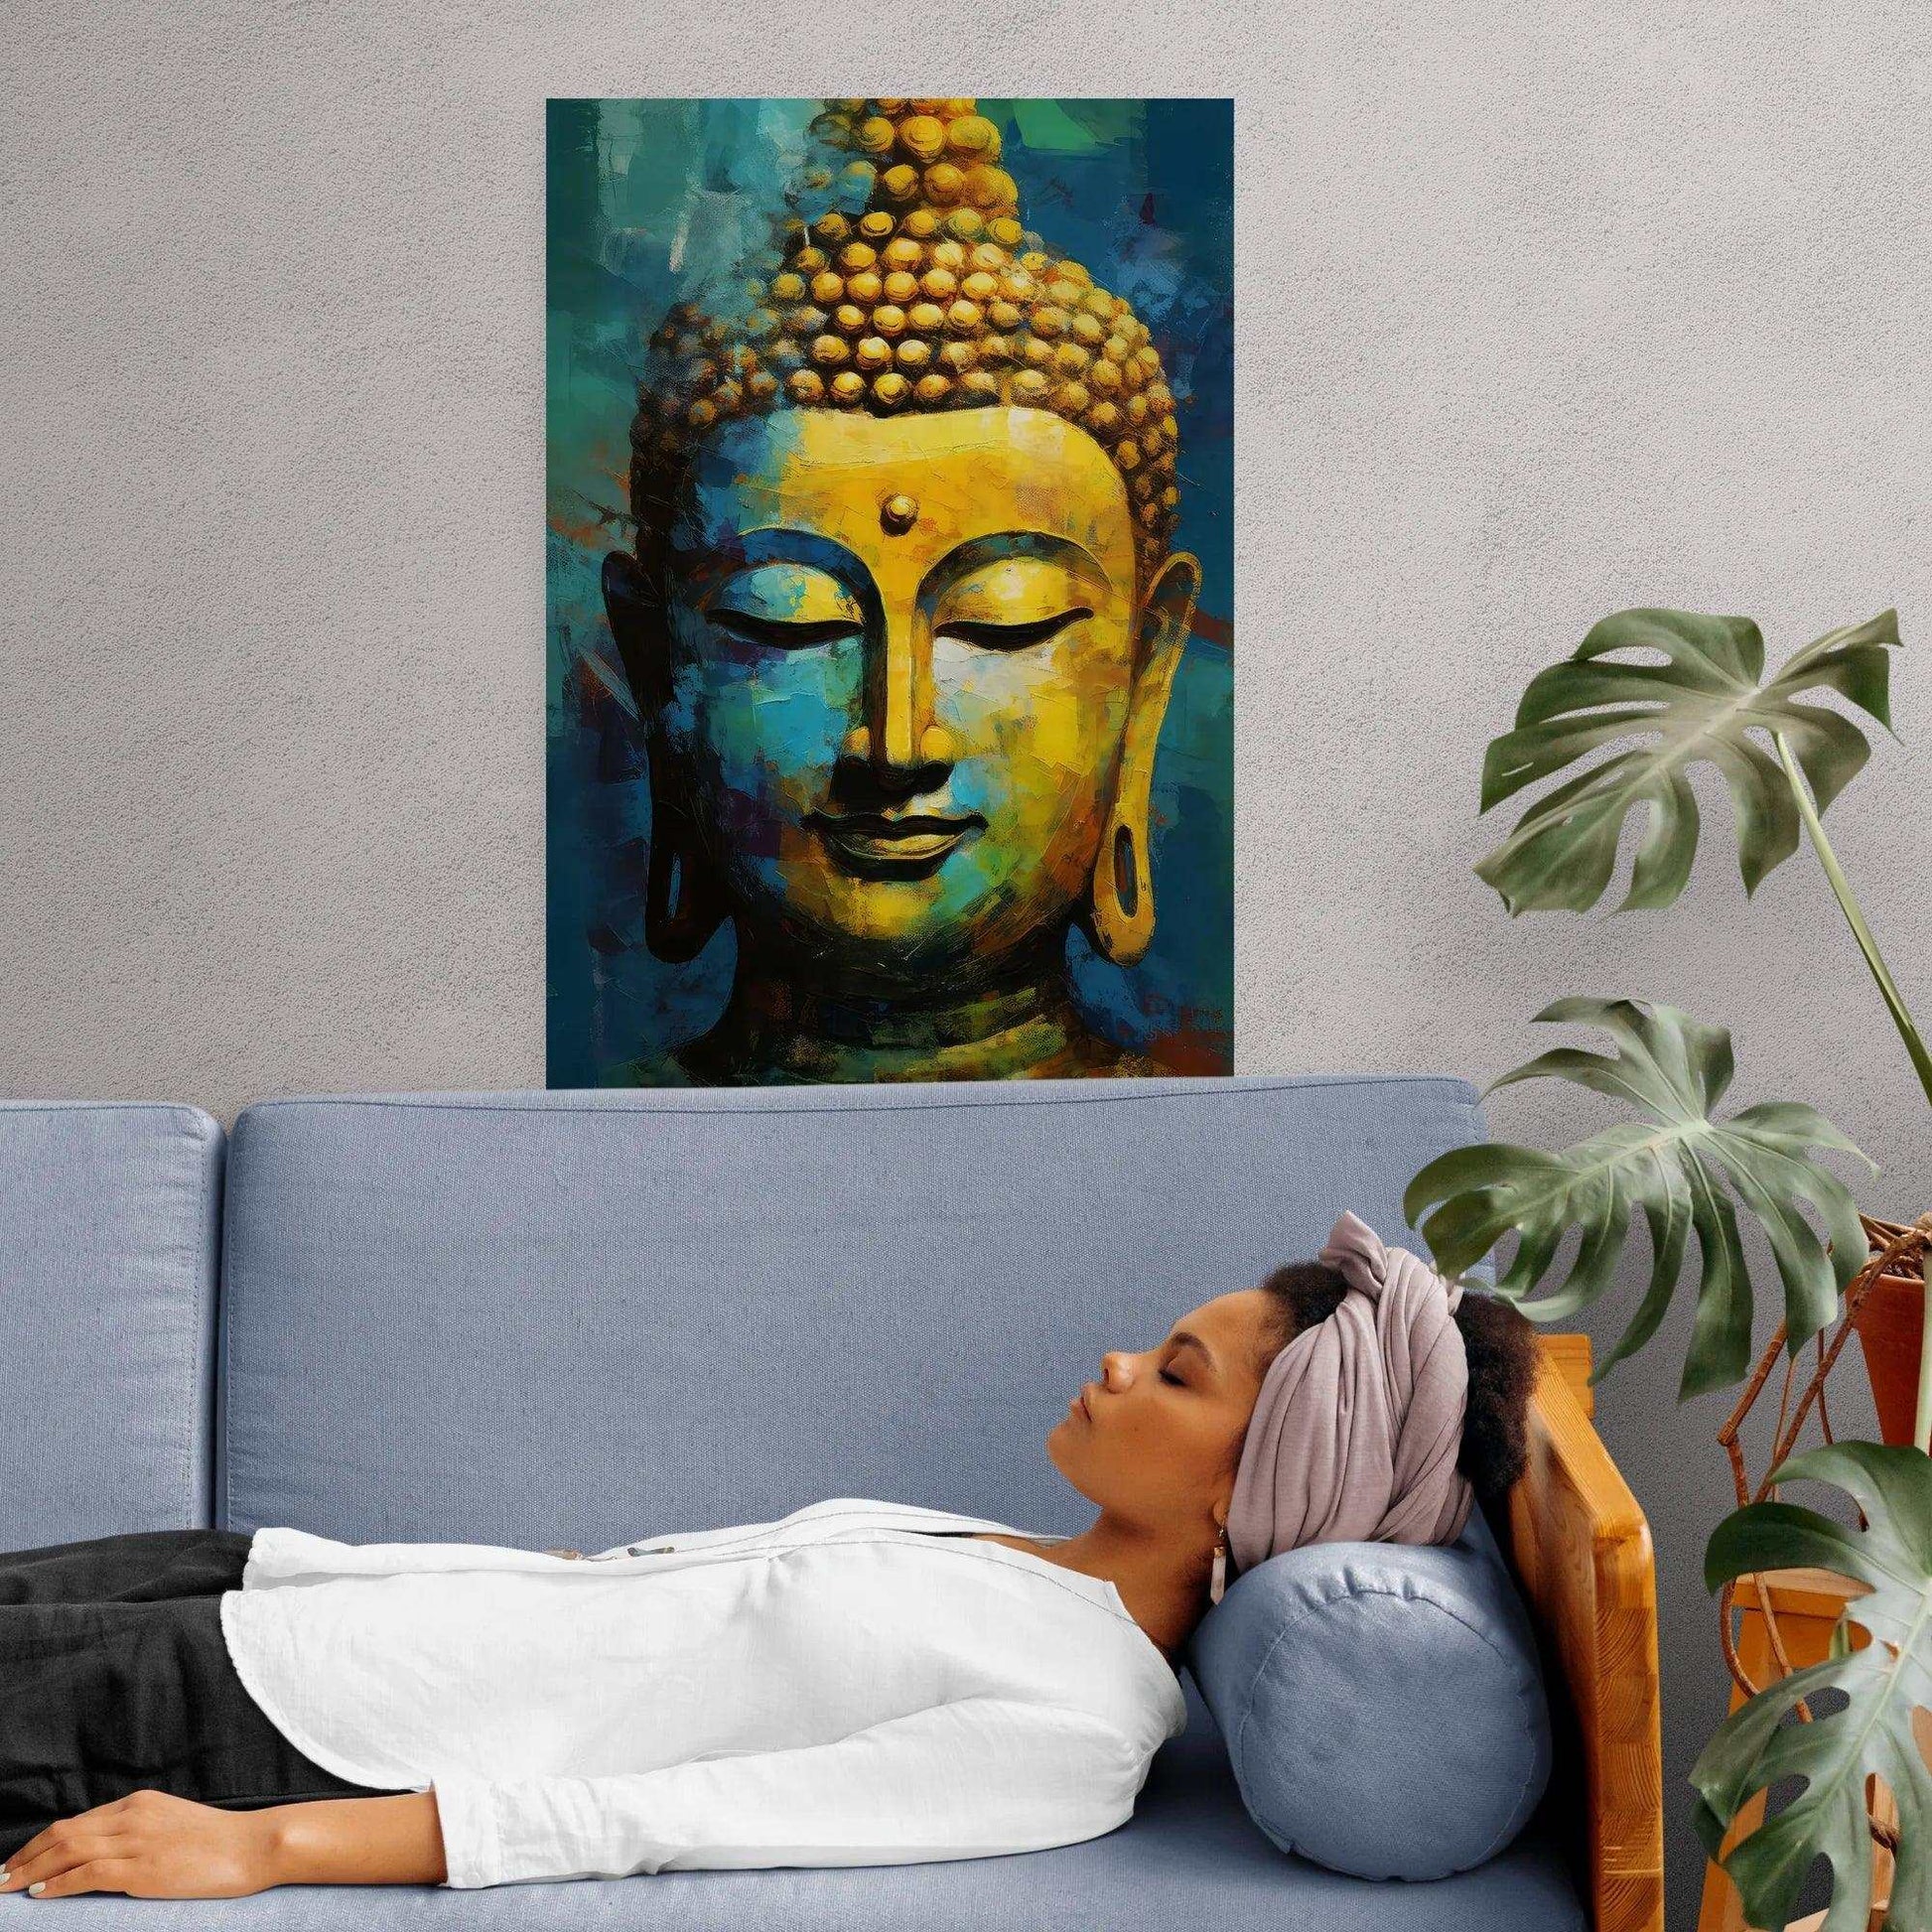 "Relaxed home atmosphere with a woman resting on a blue sofa under a colorful, impressionistic Buddha portrait with a serene expression, complemented by a tropical Monstera plant, embodying a peaceful and contemplative space."